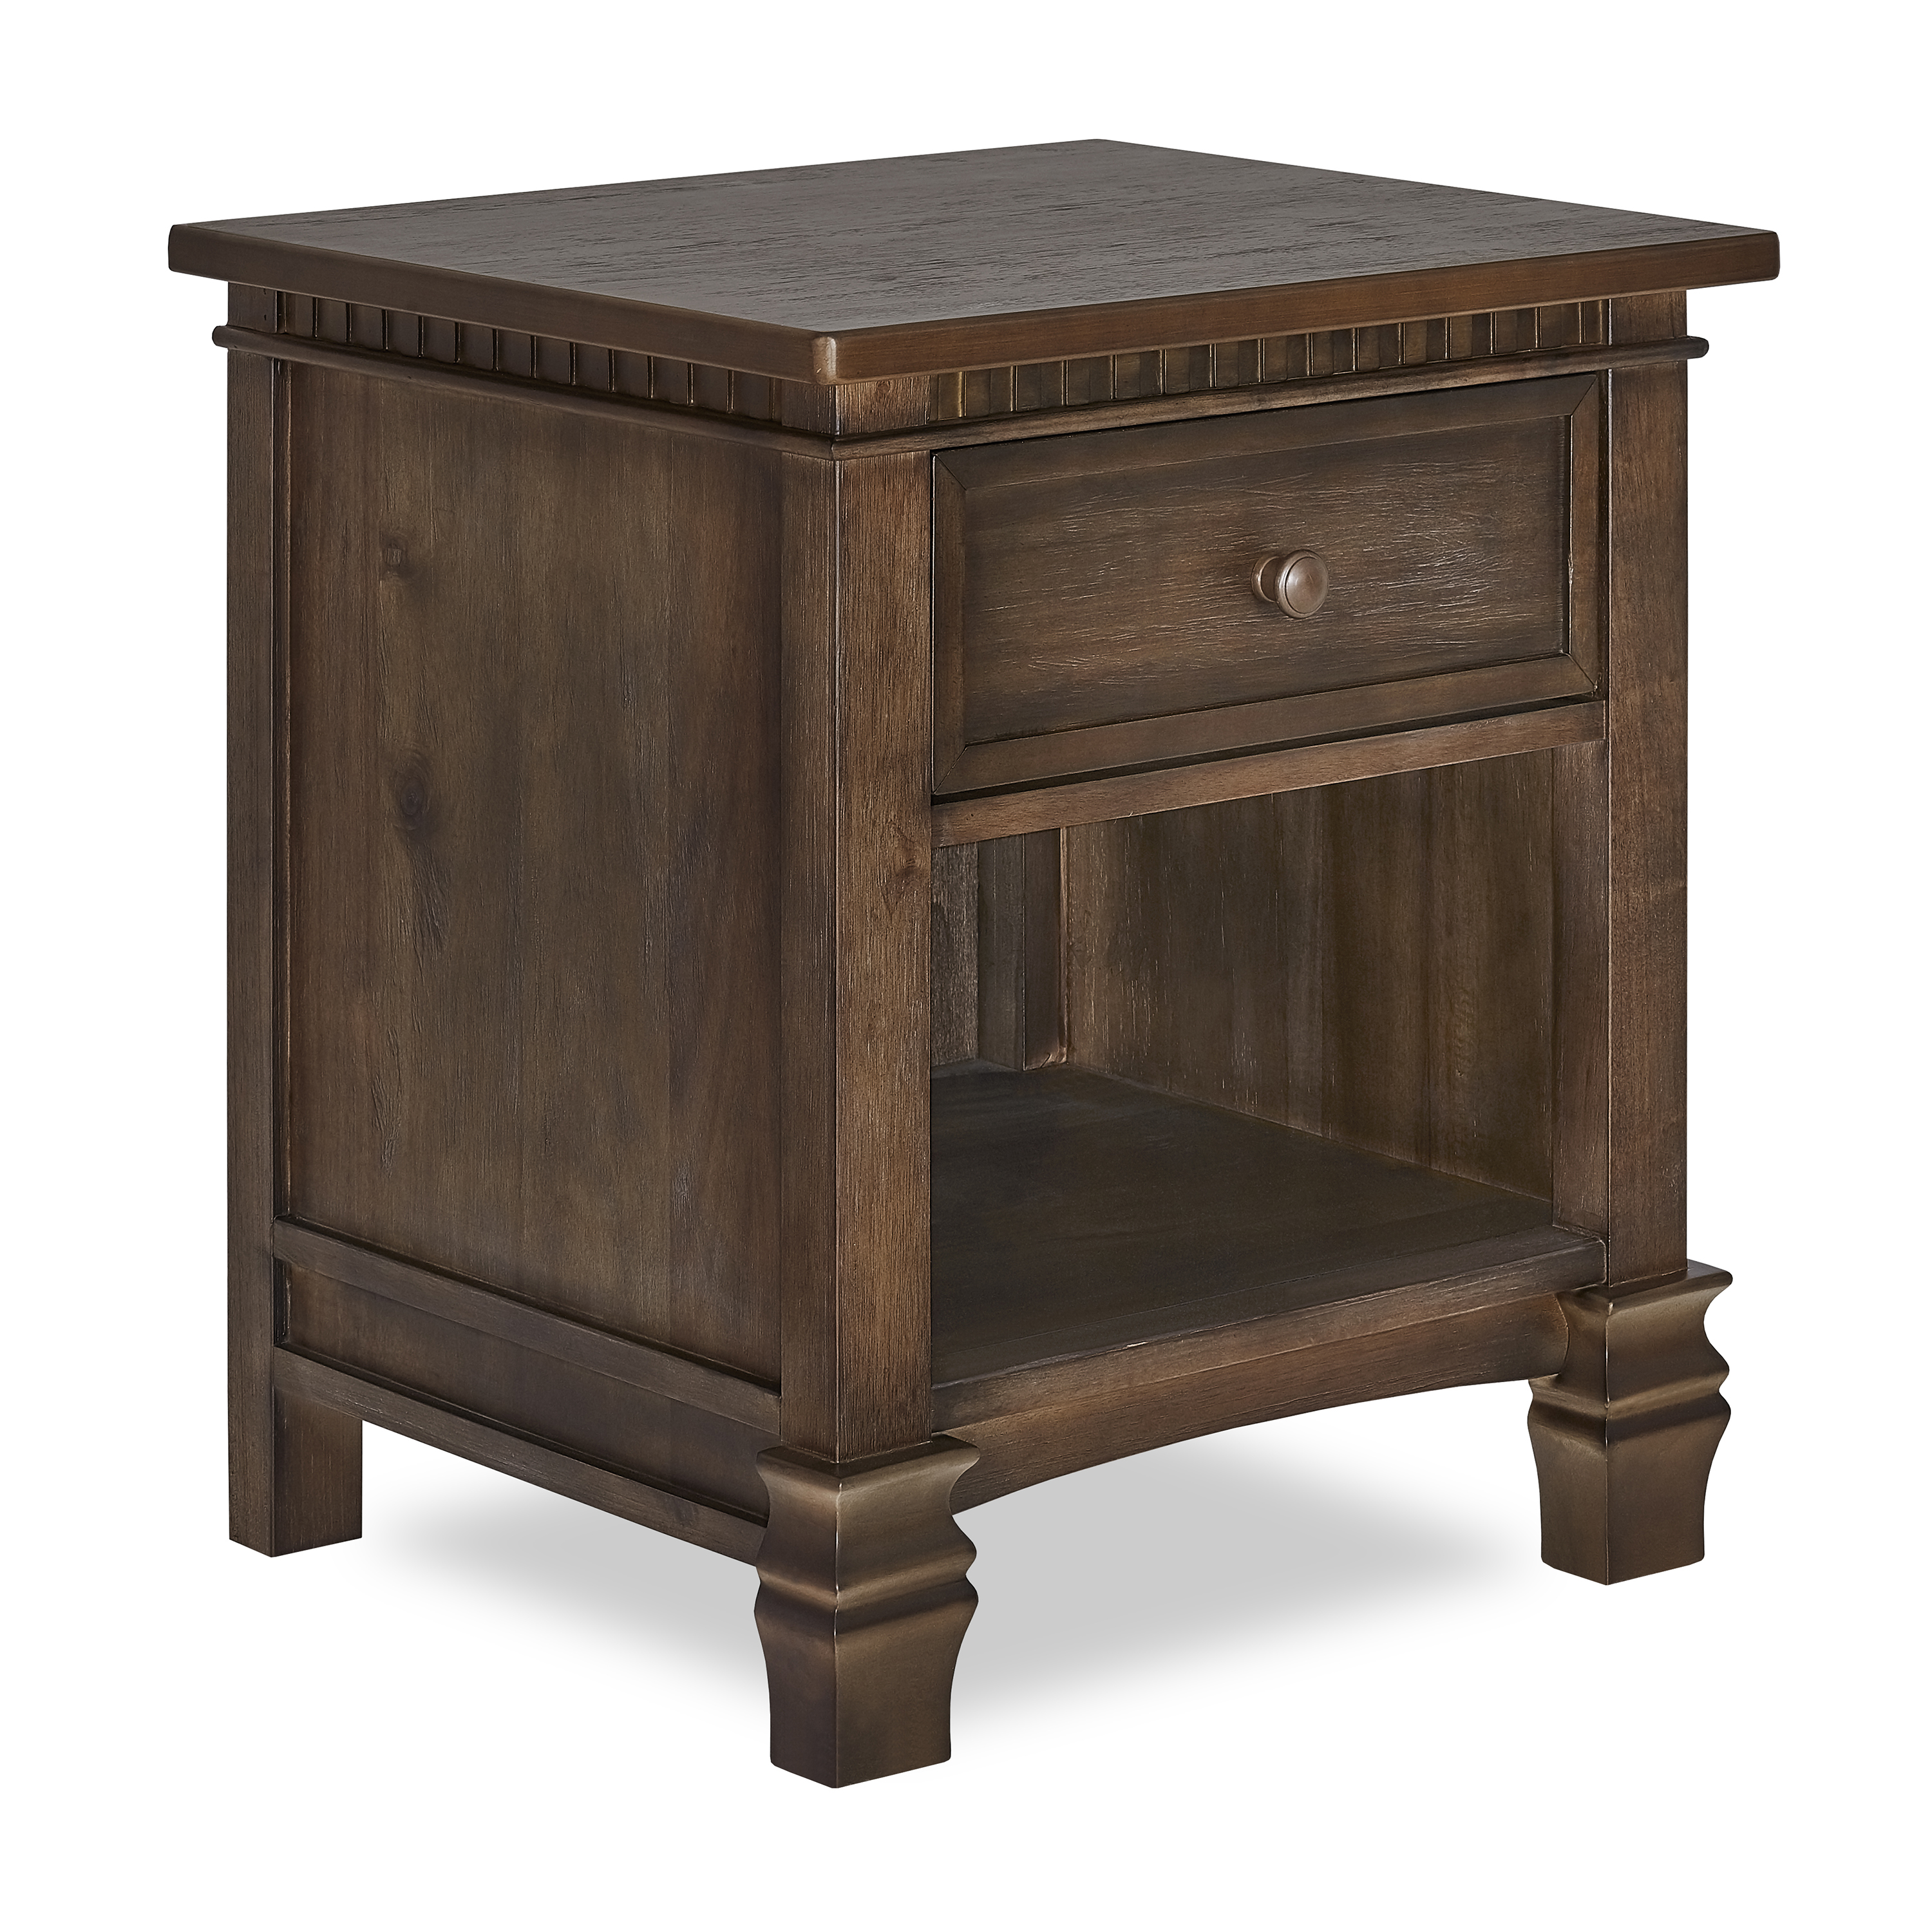 Evolur Cheyenne and Santa Fe Night Stand, Antique Brown - image 1 of 2